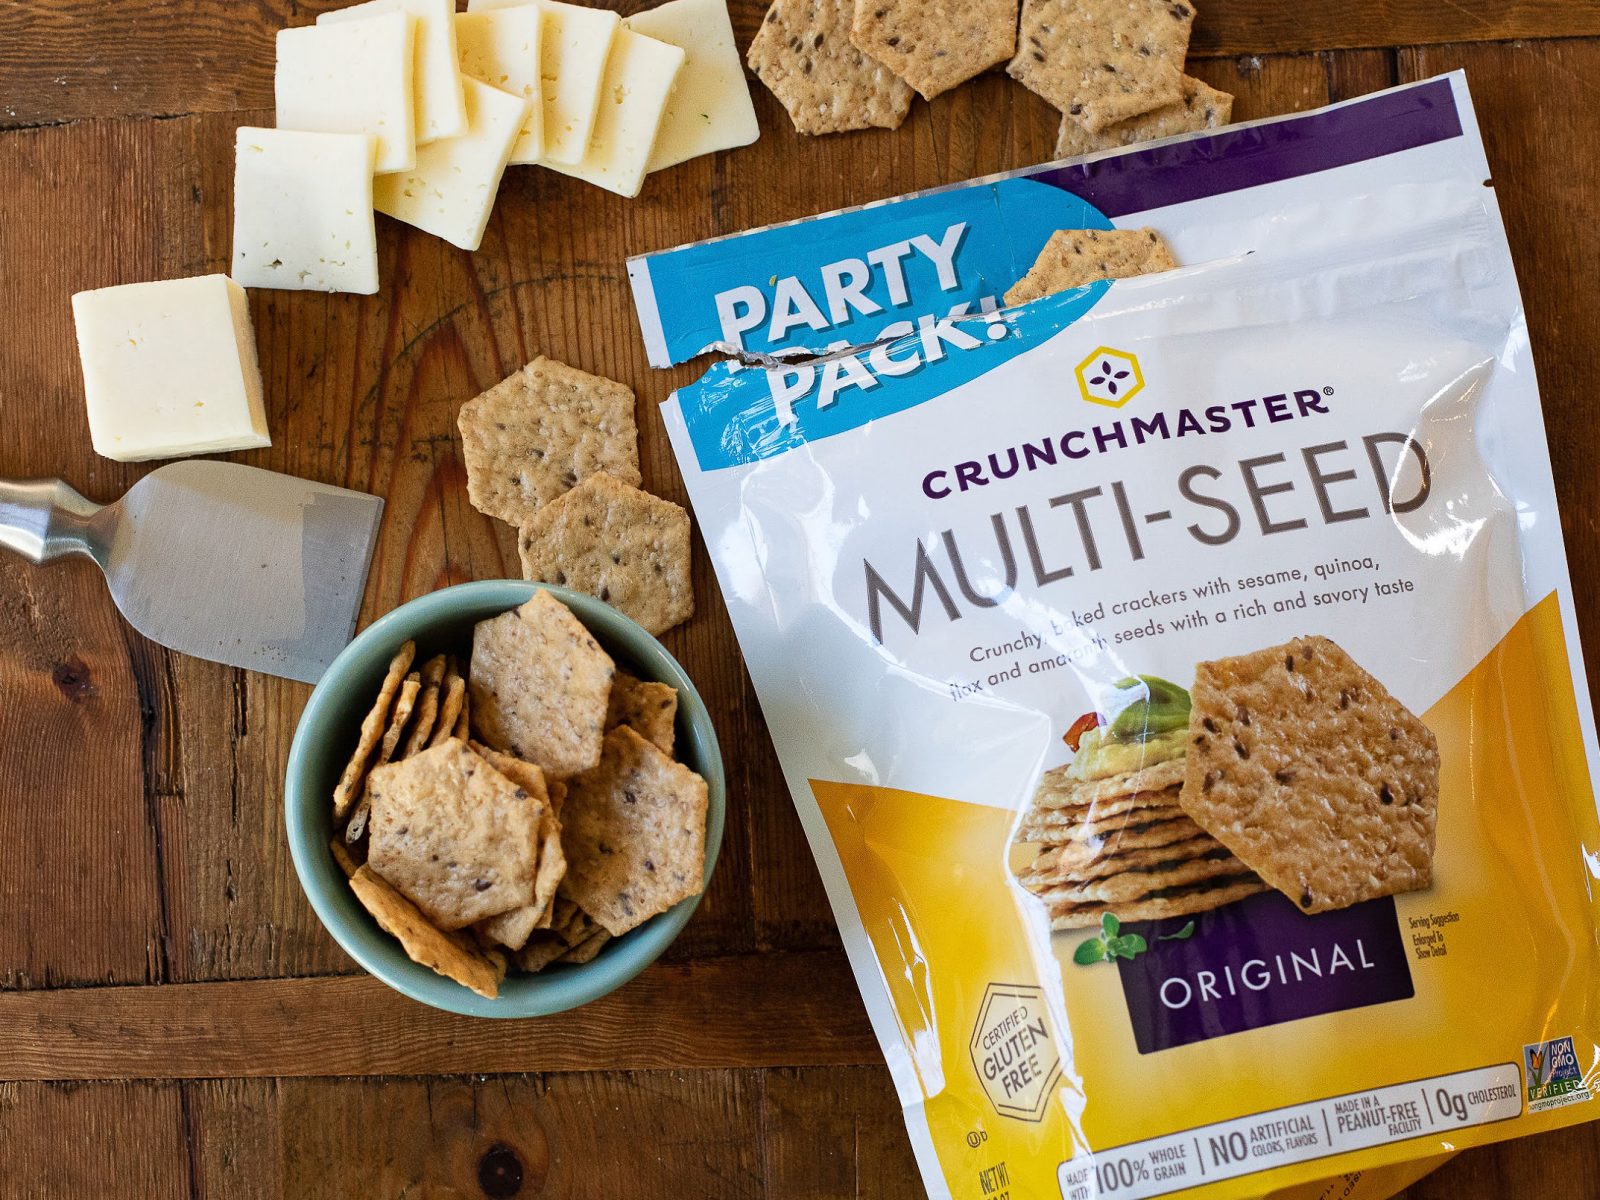 Crunchmaster Party Pack Just $4.99 At Publix (Regular Price $8.49)